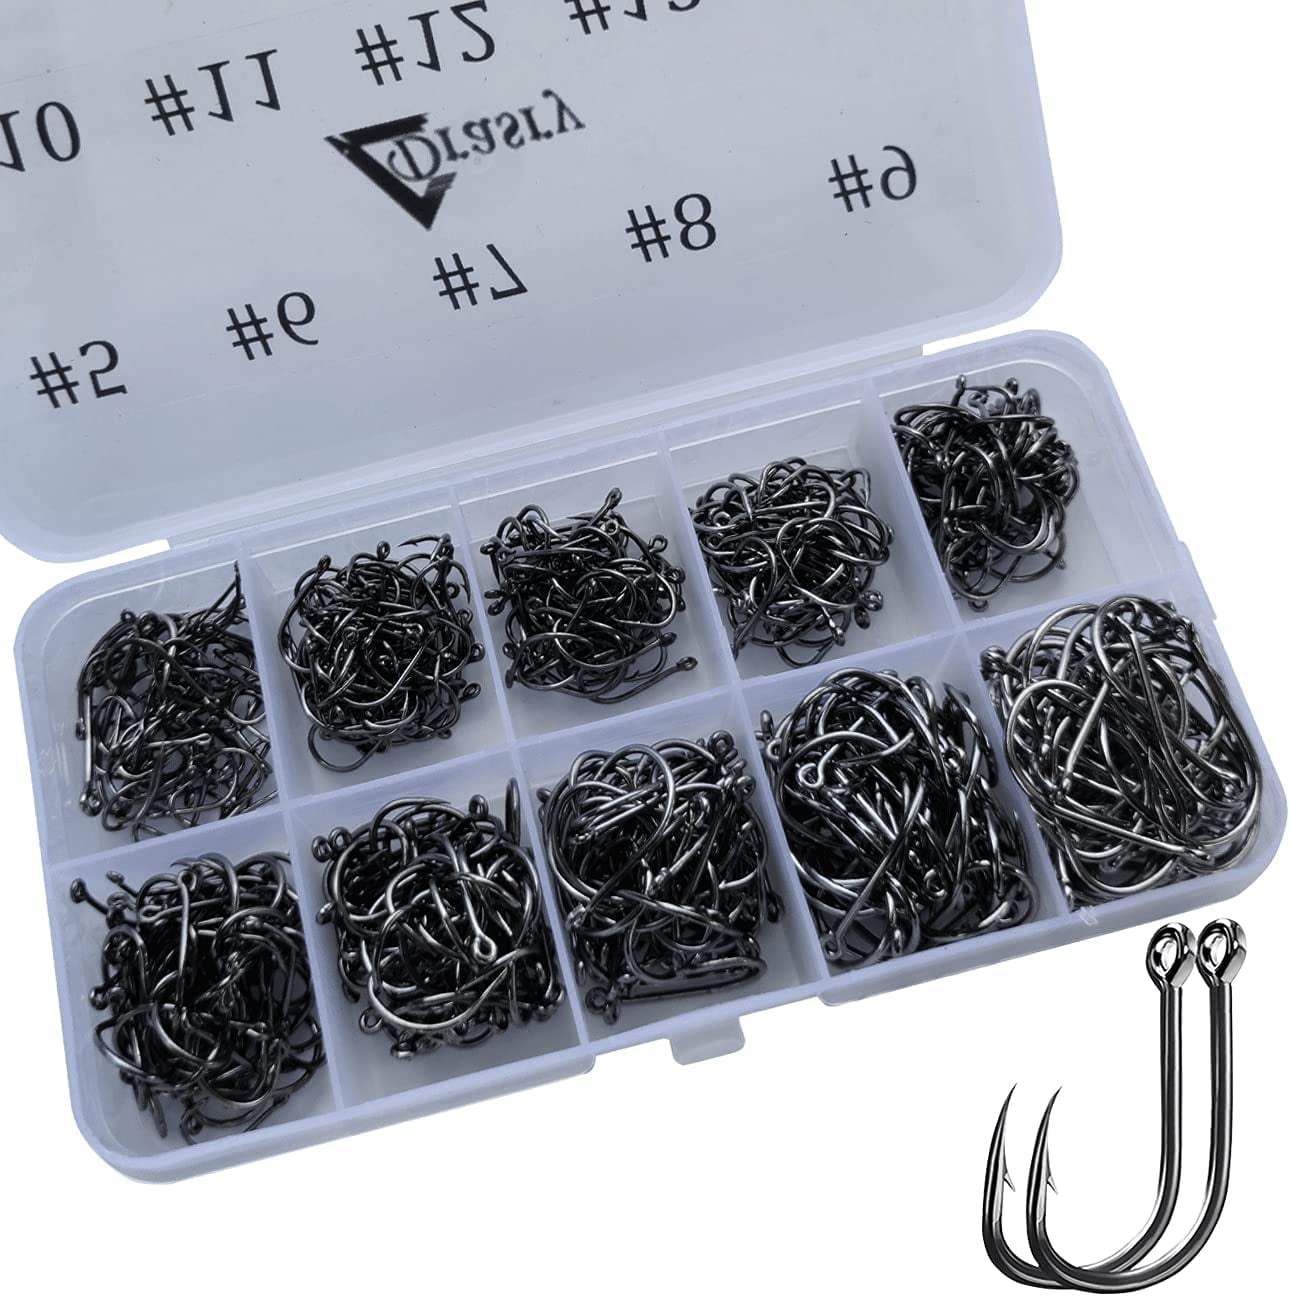 Fishing Hook Set with barbs 3-12# Perforated Hook Black tubes for 100 Boxed 